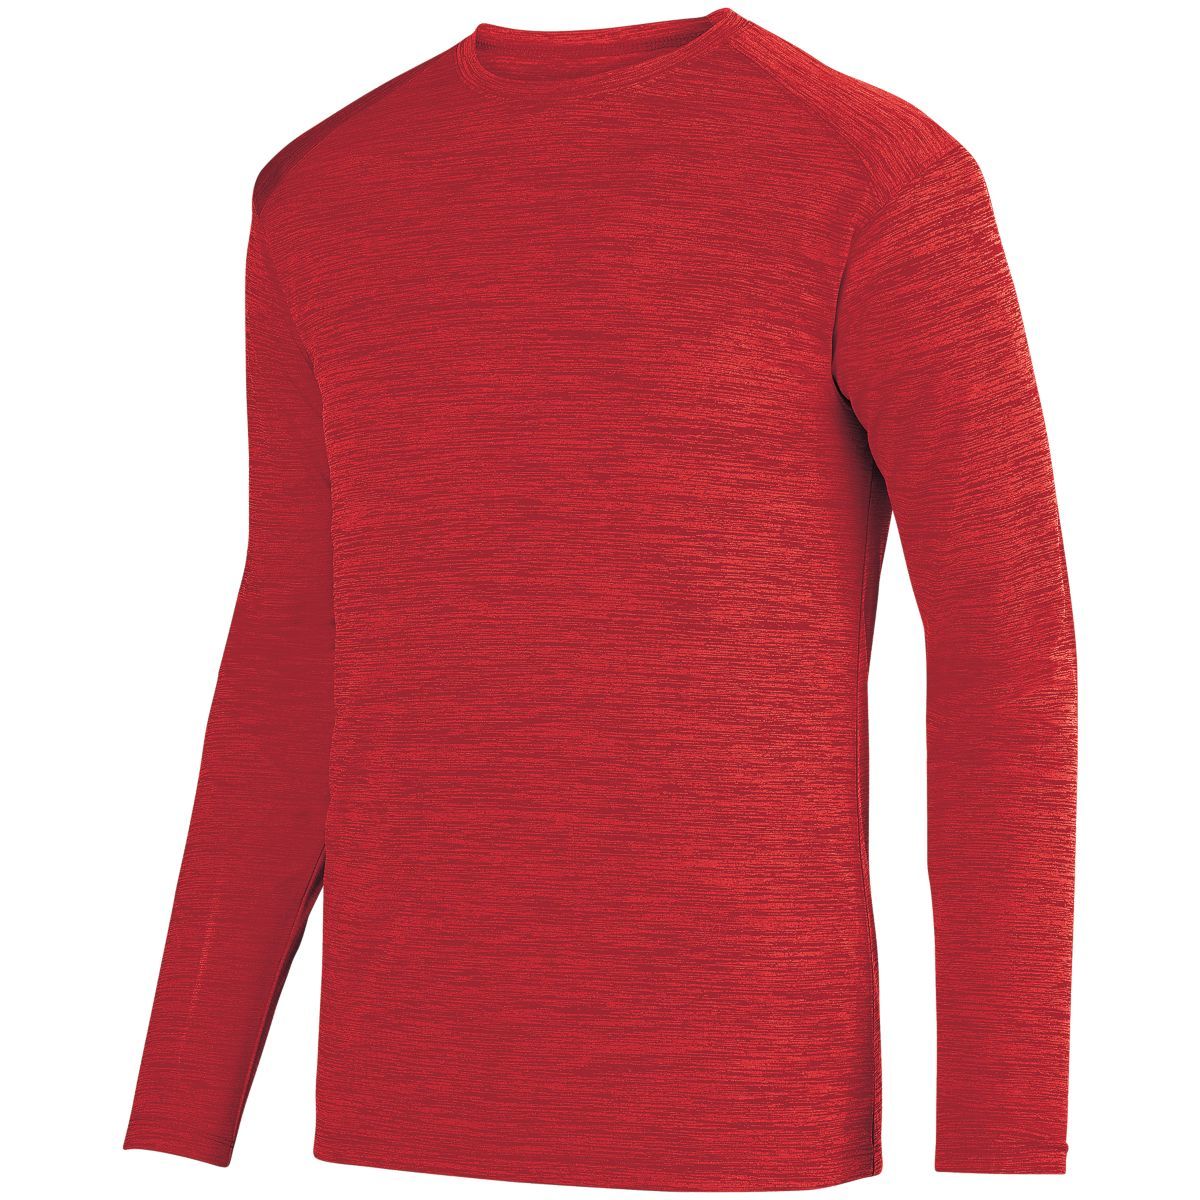 Augusta Sportswear Shadow Tonal Heather Long Sleeve Tee in Red  -Part of the Adult, Adult-Tee-Shirt, T-Shirts, Augusta-Products, Shirts, Tonal-Fleece-Collection product lines at KanaleyCreations.com